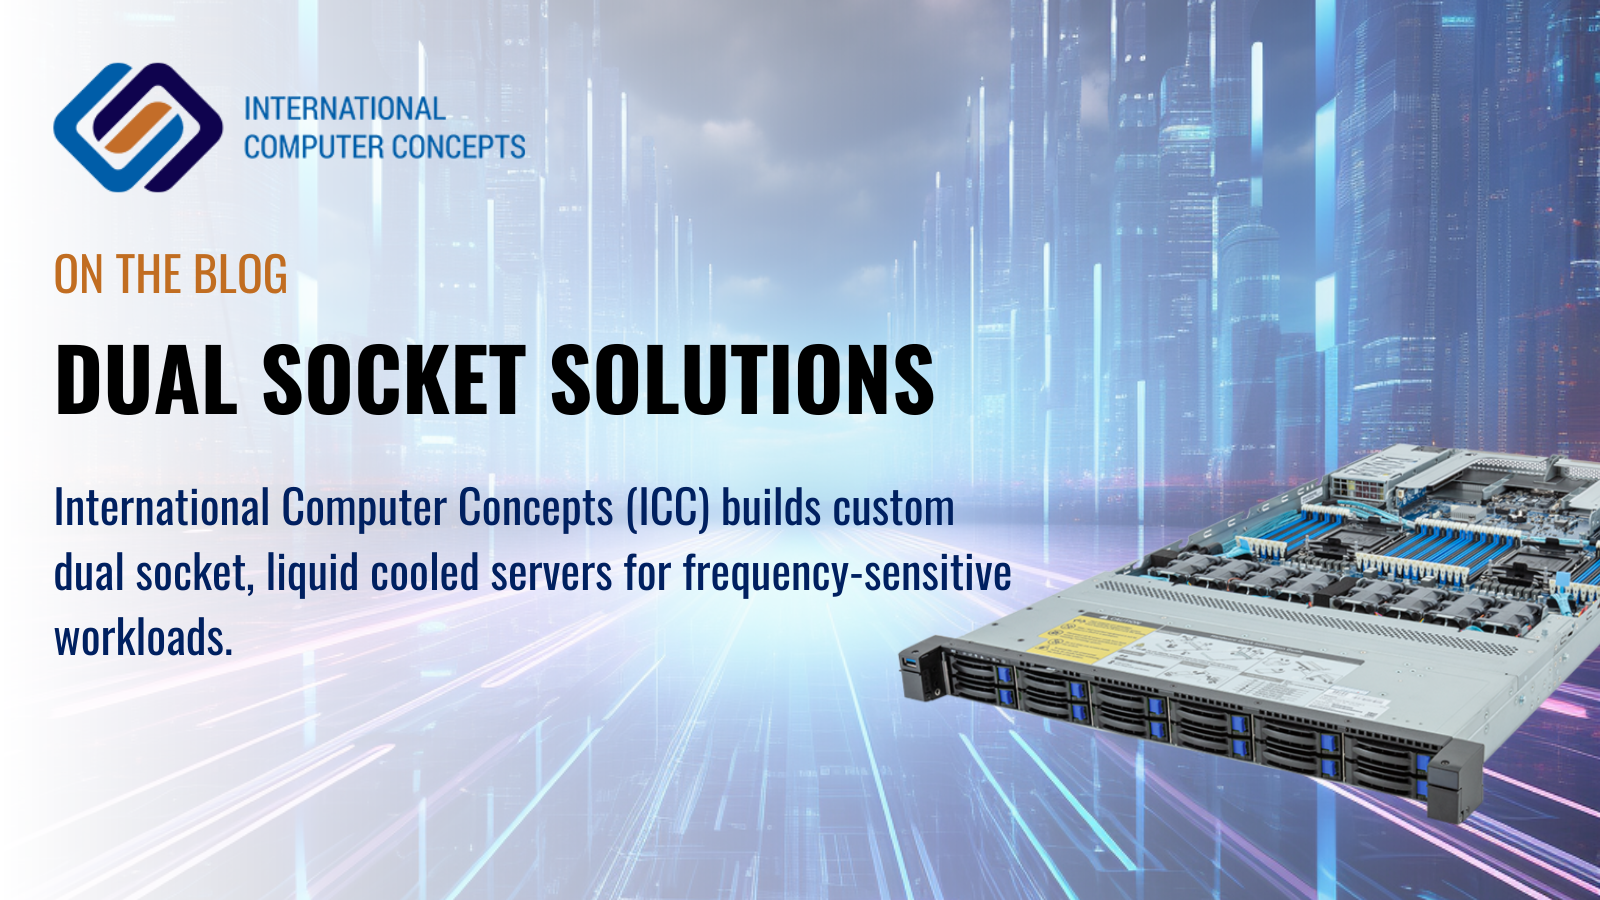 ICC Unveils Next-Generation Liquid-Cooled Servers for Enhanced Performance and Efficiency